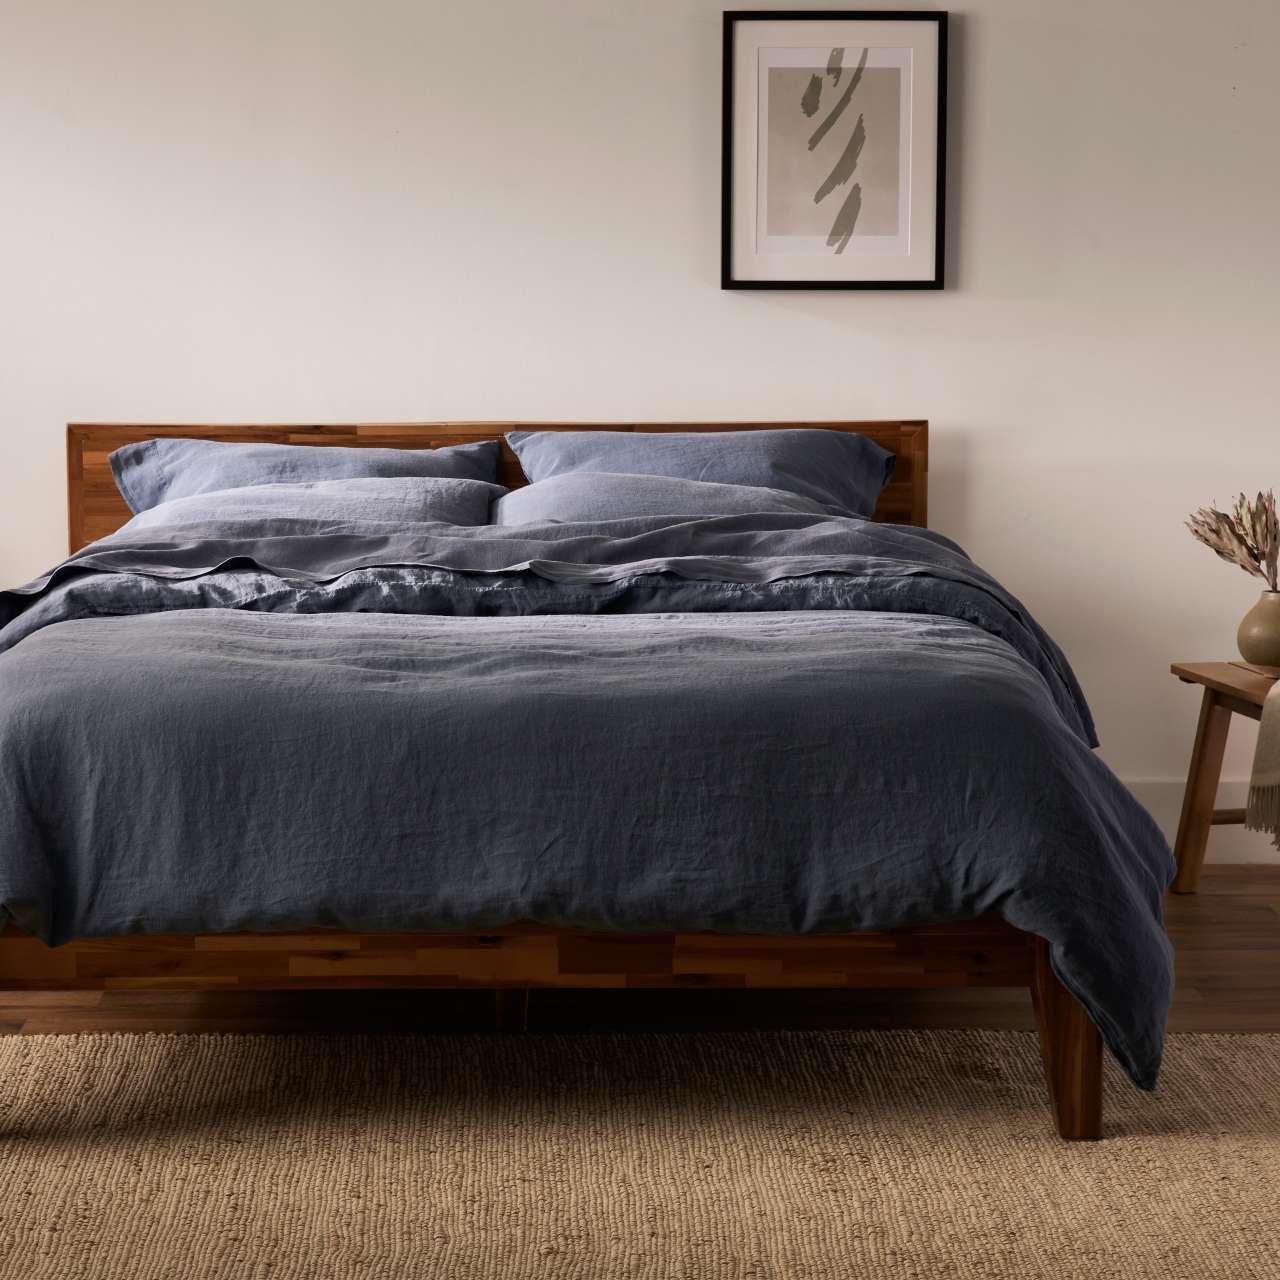 Flax Linen Bed Sheets Image 3